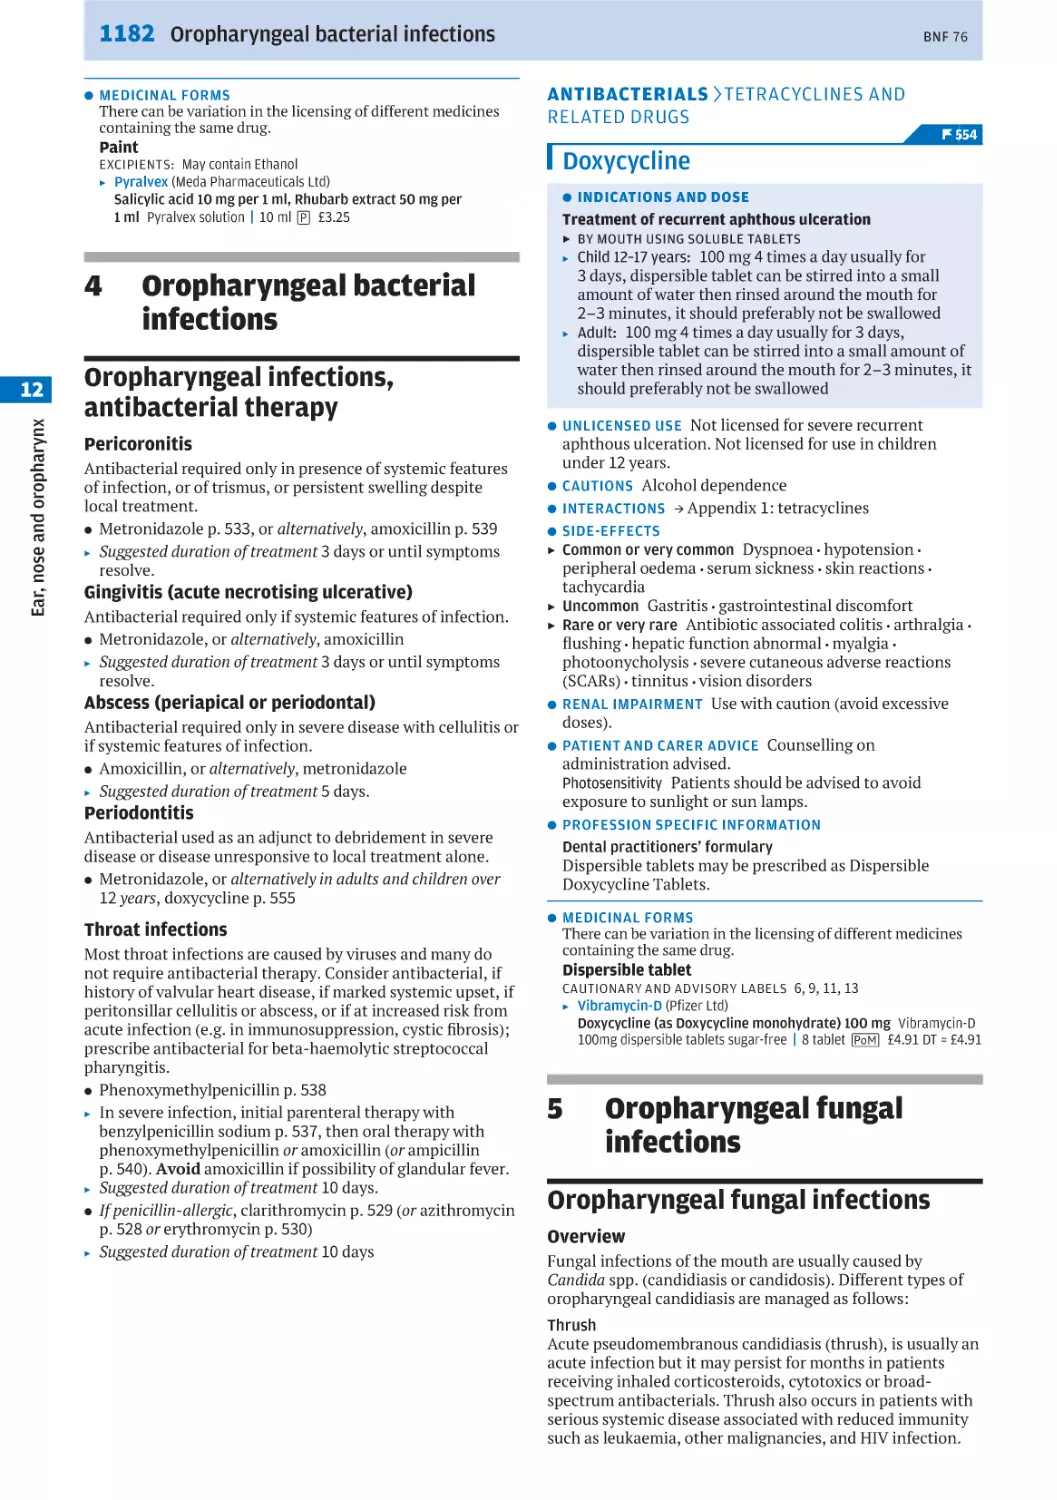 Oropharyngeal bacterial infections
Oropharyngeal fungal infections